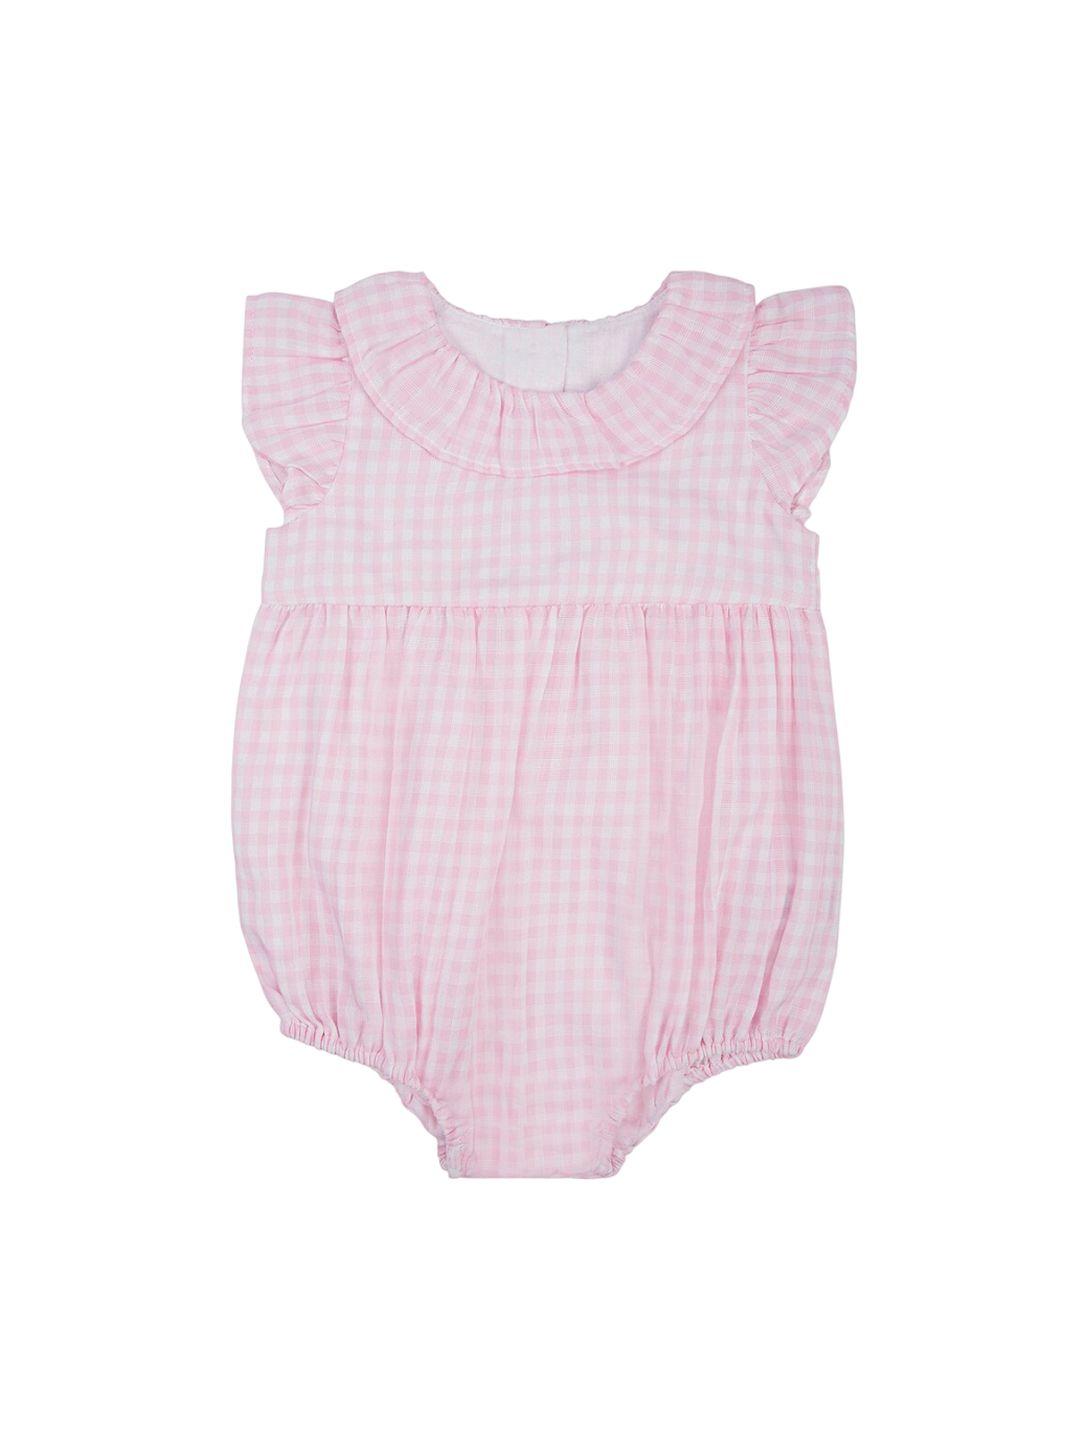 haus & kinder Infant Girls Printed Pure Checked Rompers